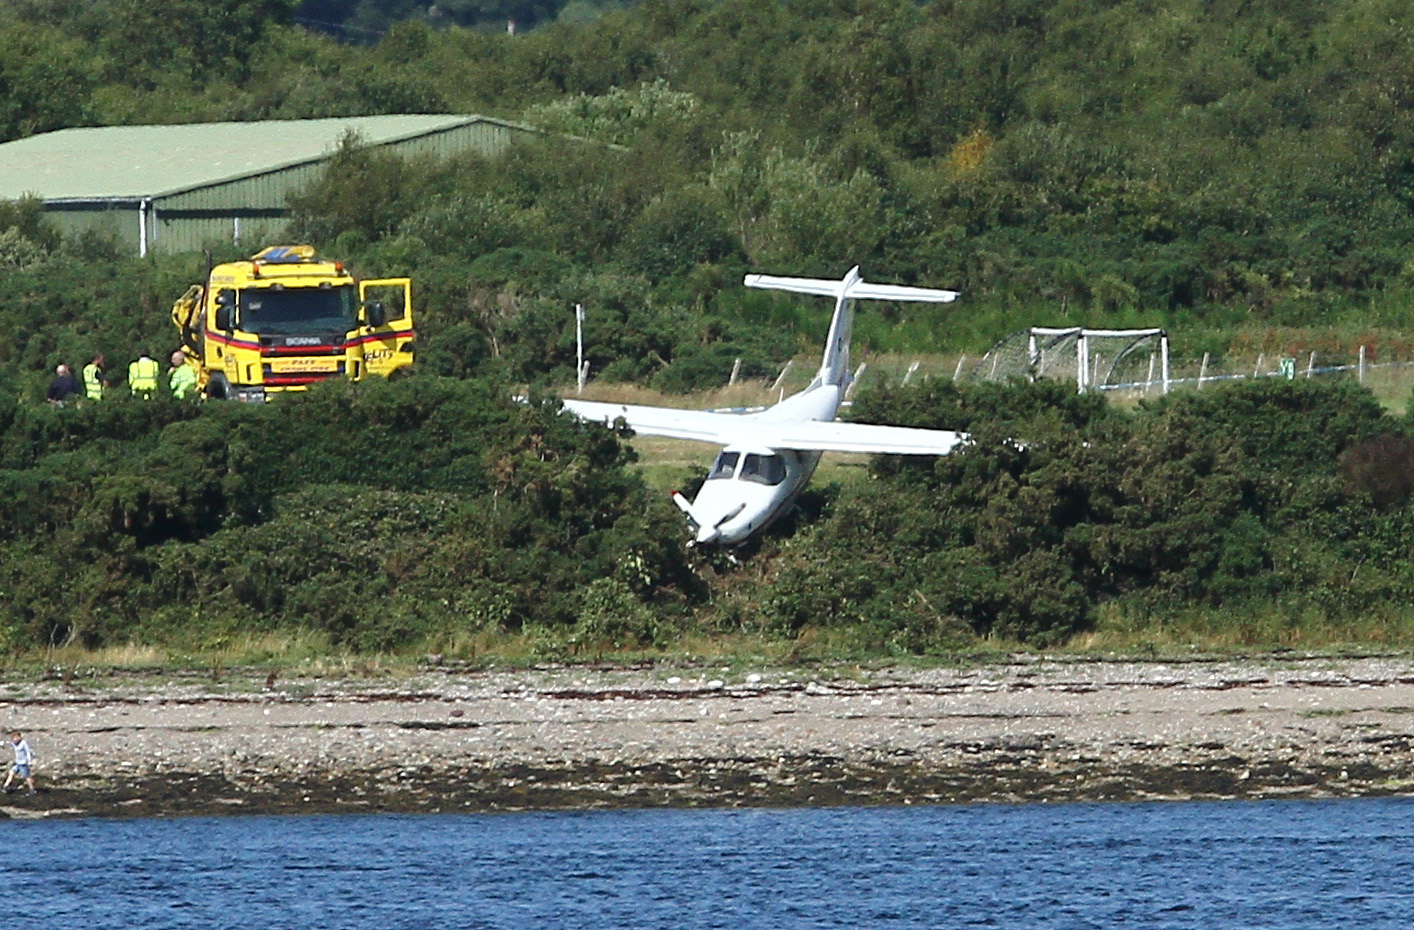 Plane with 3 occupants crash landed oban airport nearly landing on the beach at oban airport . the 3 occupants are thought not to be seriously injured picture kevin mcglynn